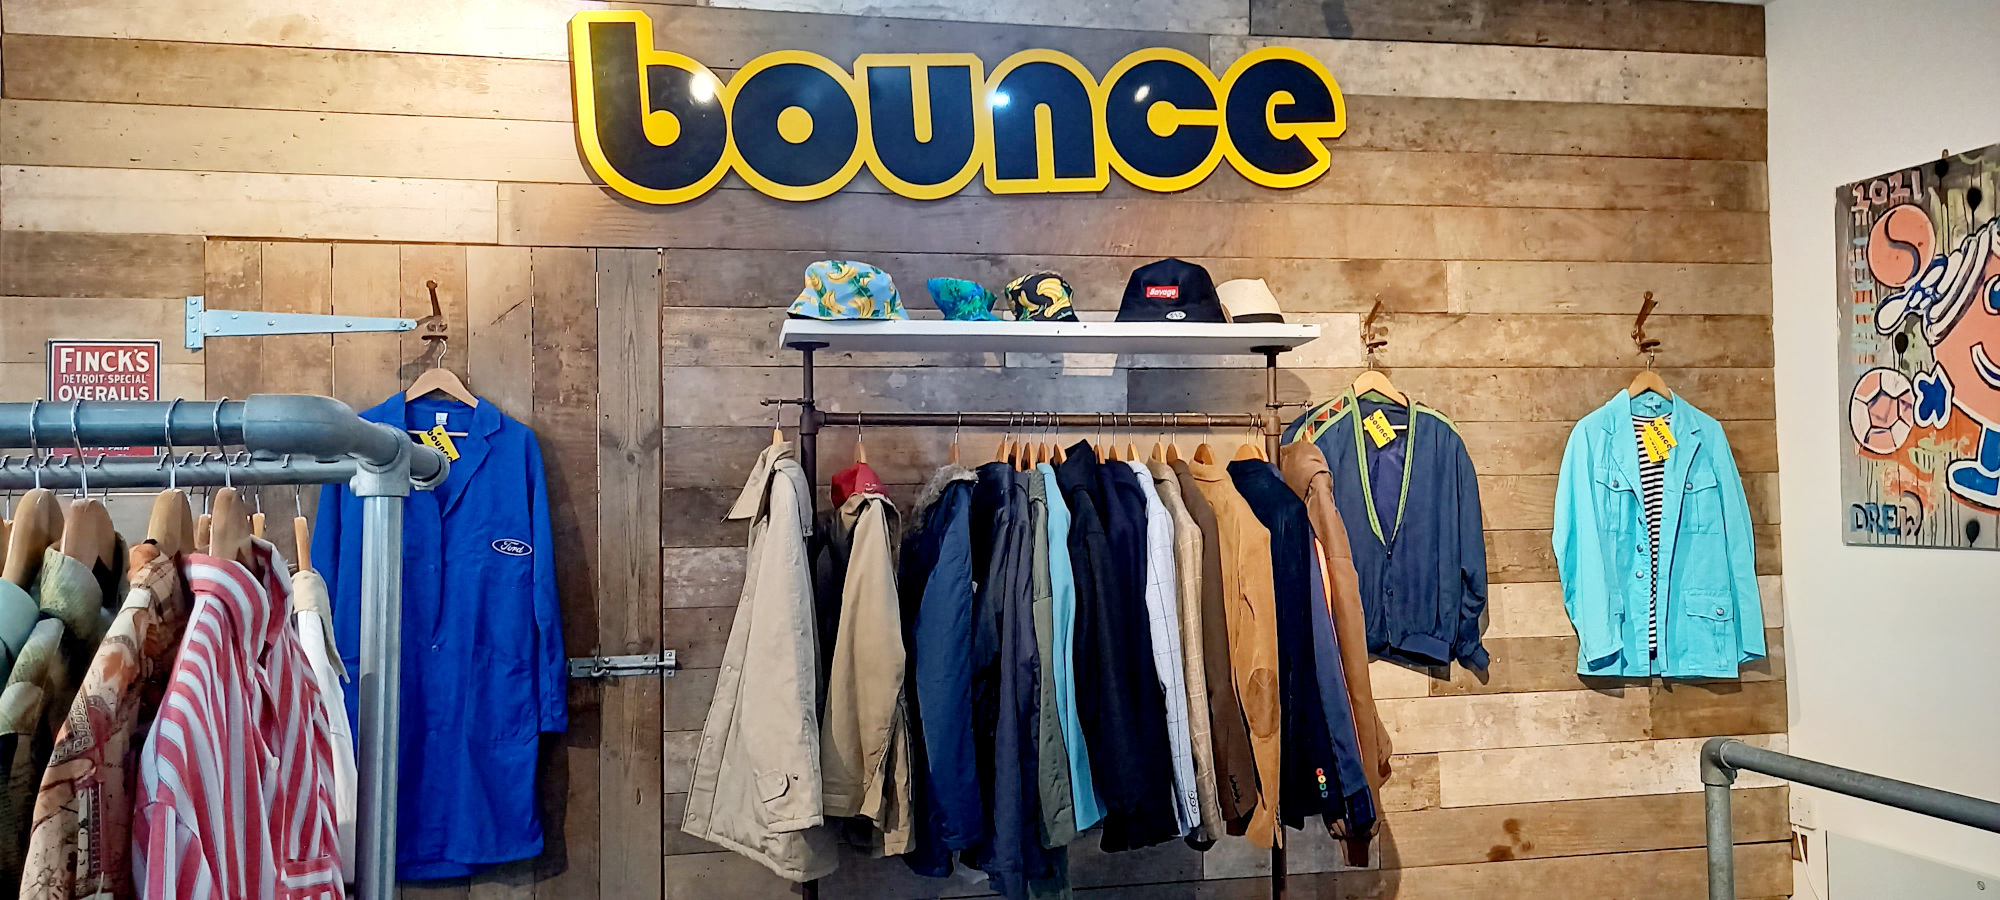 Bounce Sign Indoors